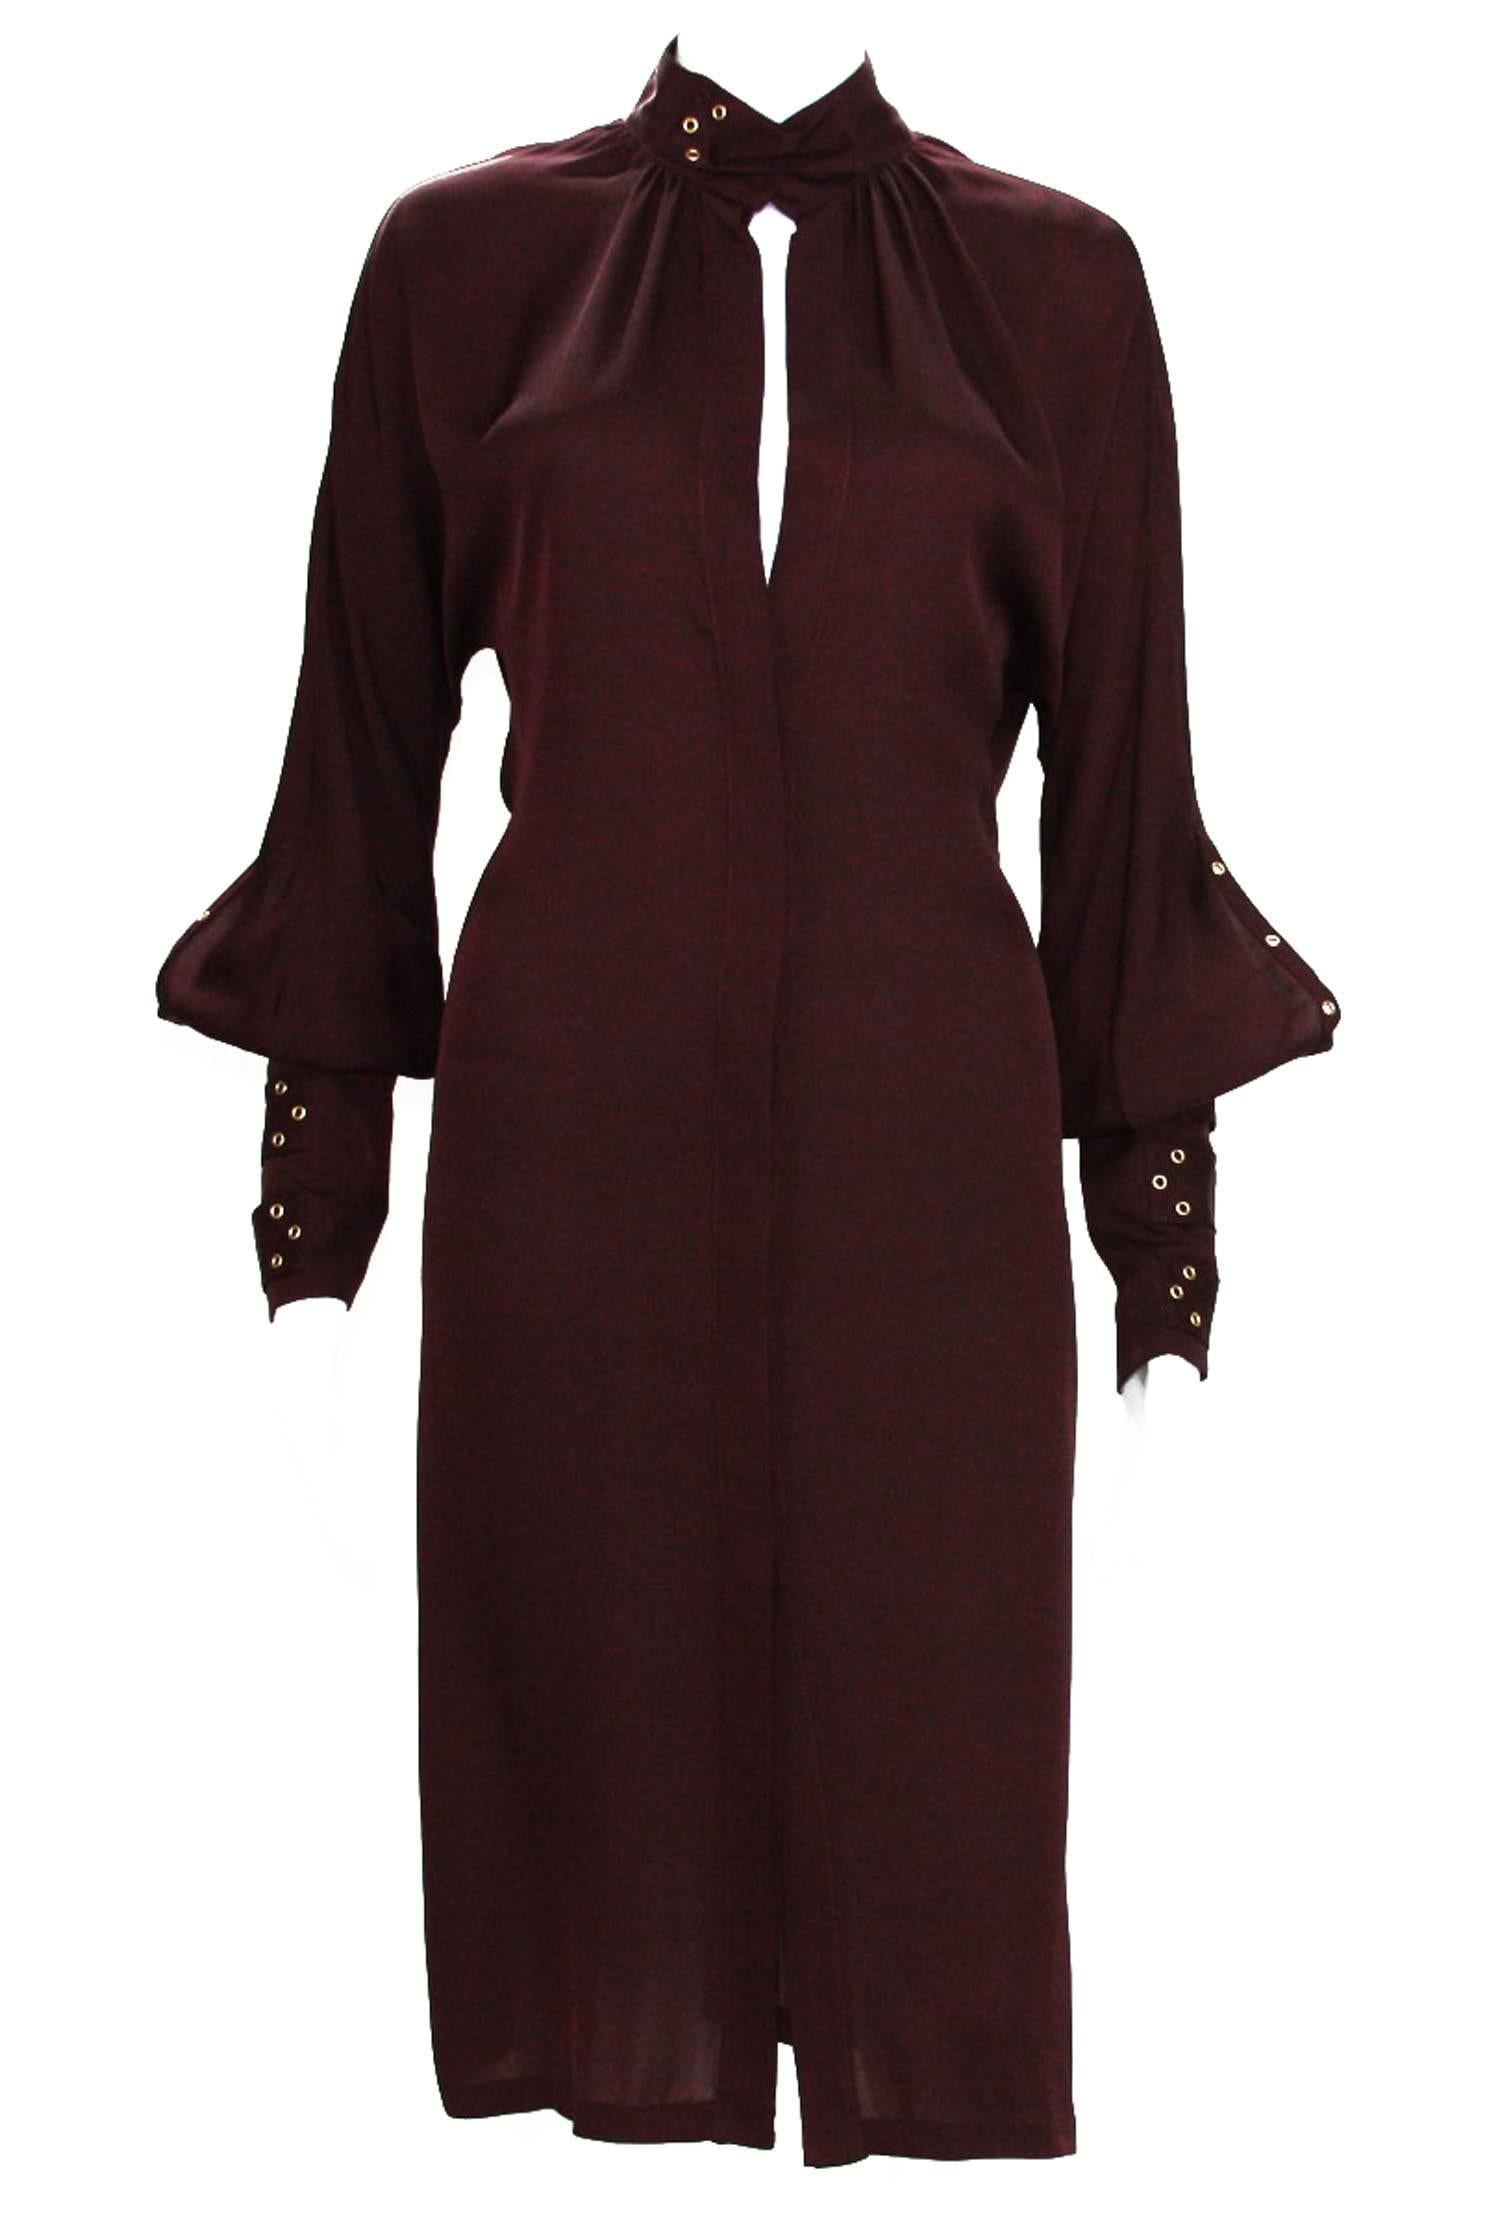  Tom Ford for Gucci Silk Dress
 2003 Collection
 Italian Size 40 - US 4
100% Silk Color - Deep Burgundy
 Hidden Button Closure at Front
 Sleeves Finished with Triple Buckle and Grommet Bands
 Made in Italy.
 Excellent Condition.